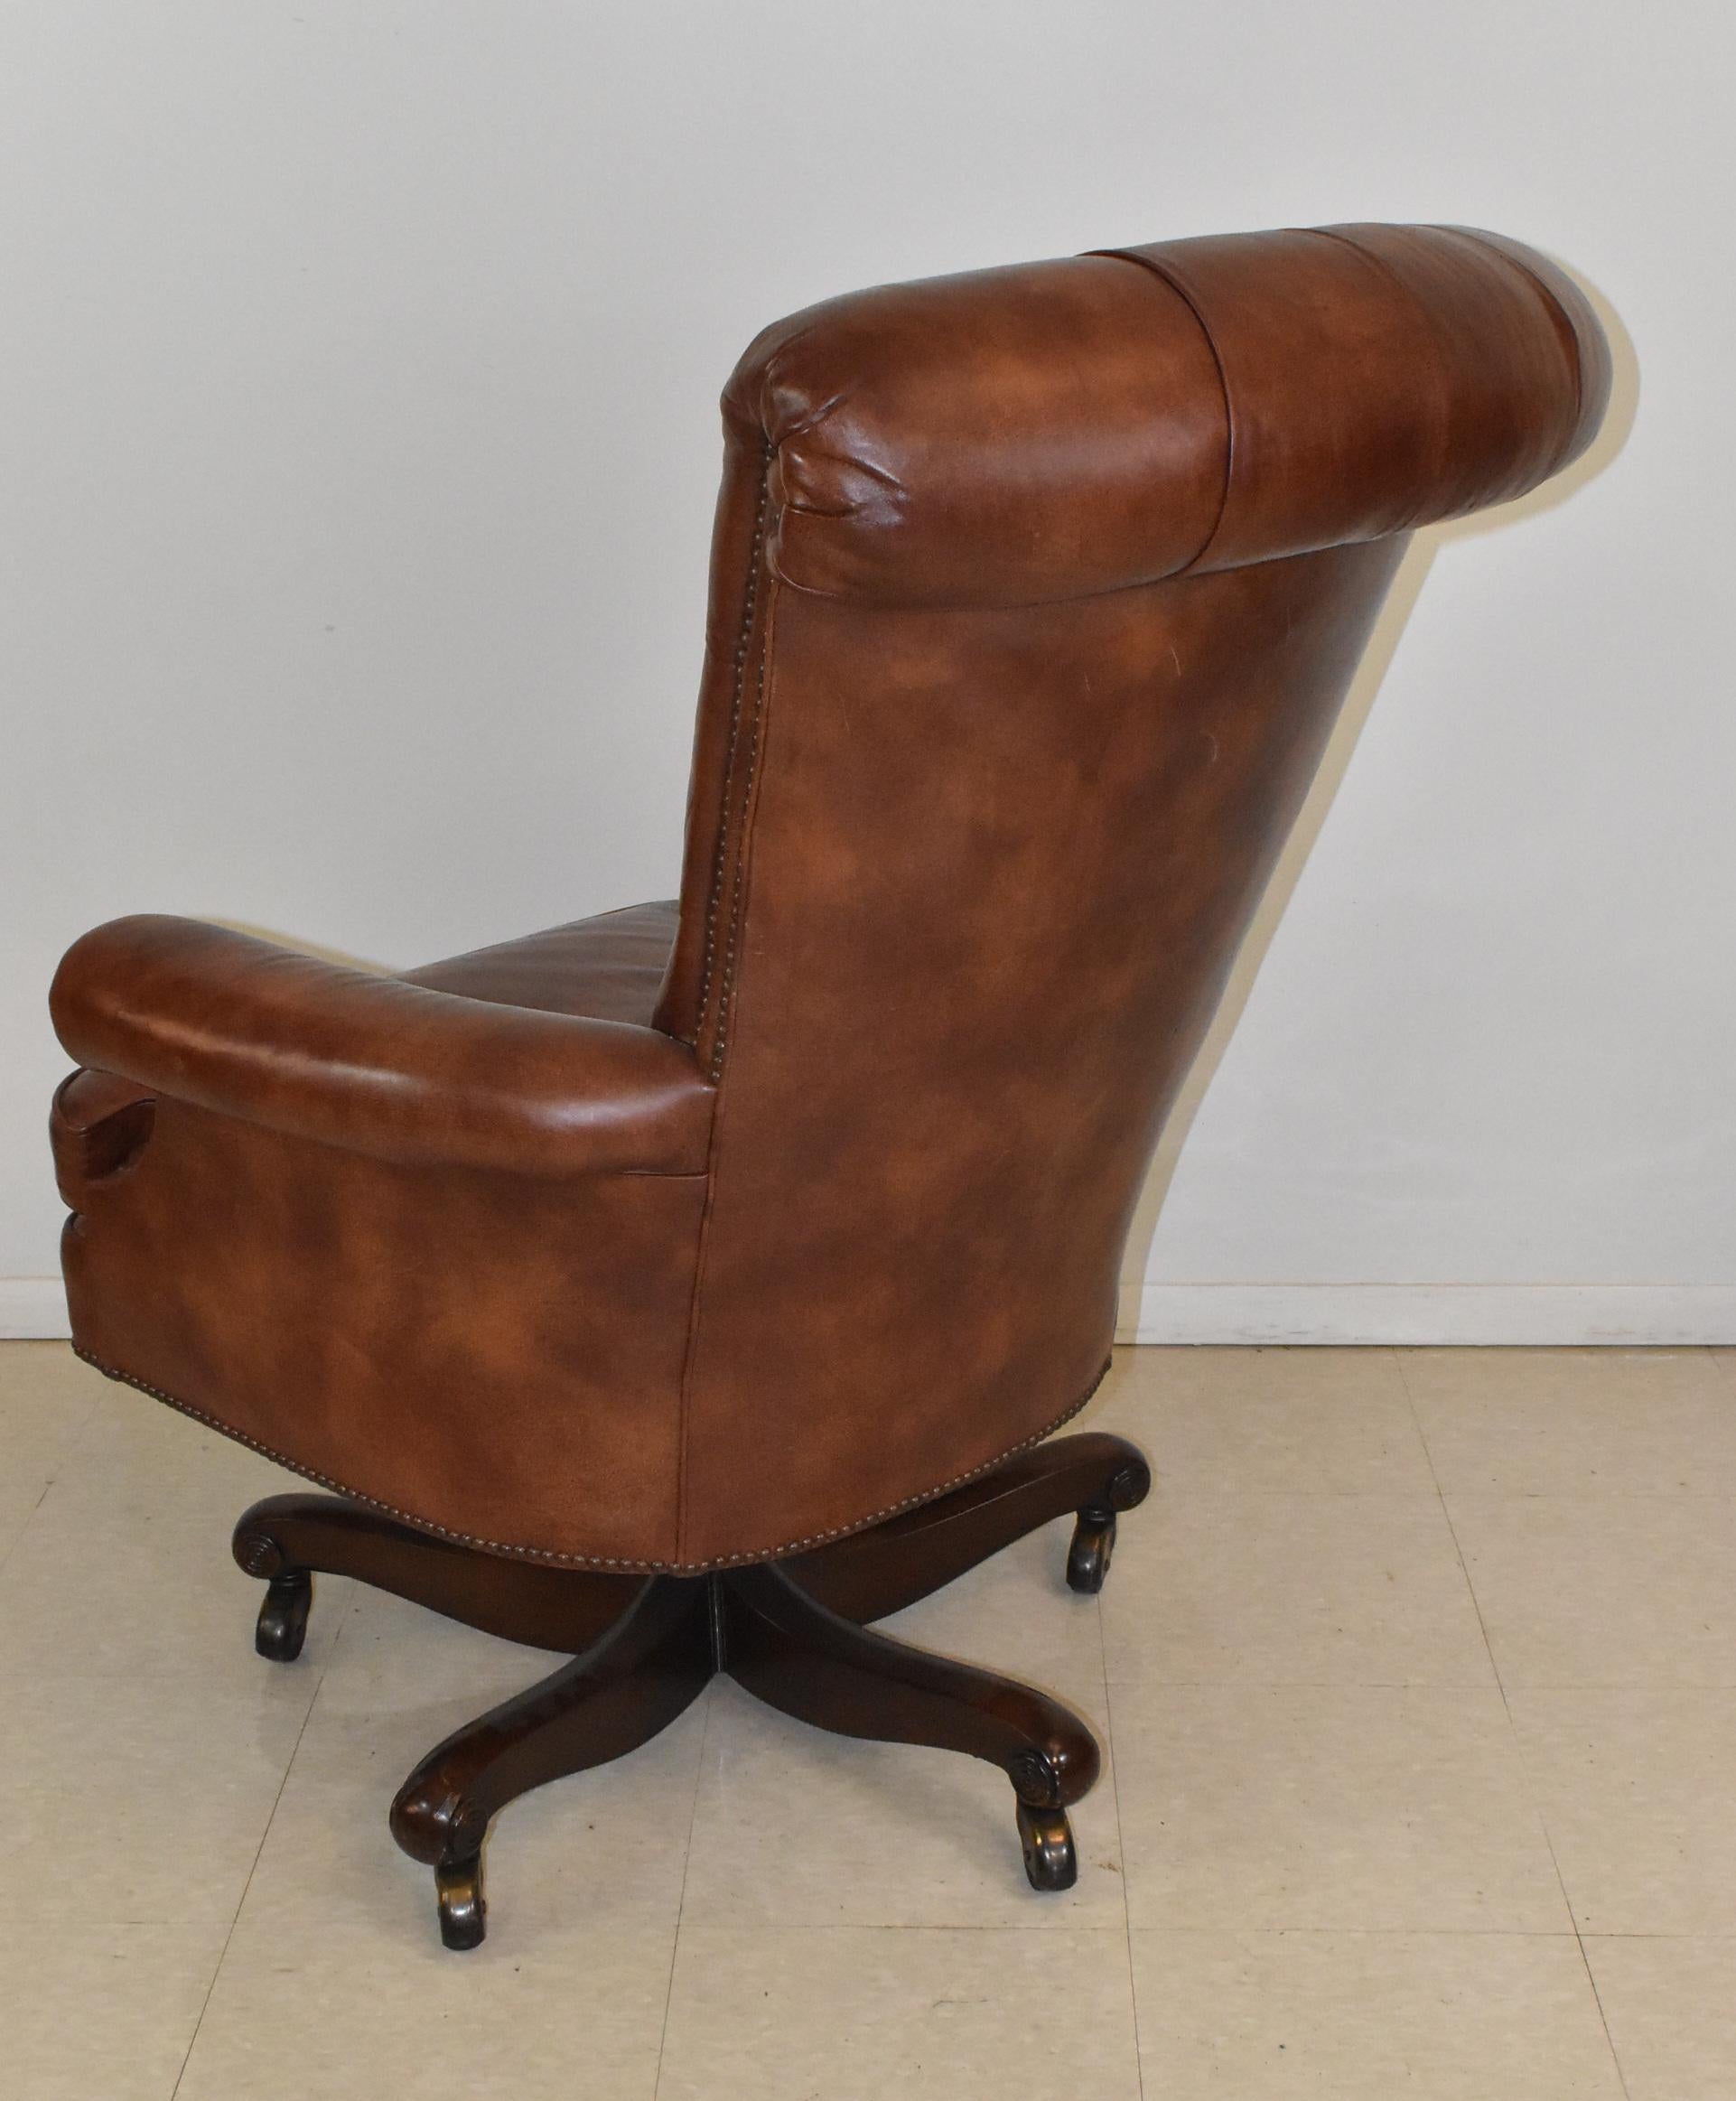 Baker Furniture tufted brown leather chair with brass nailhead trim. Five legs with rollers.